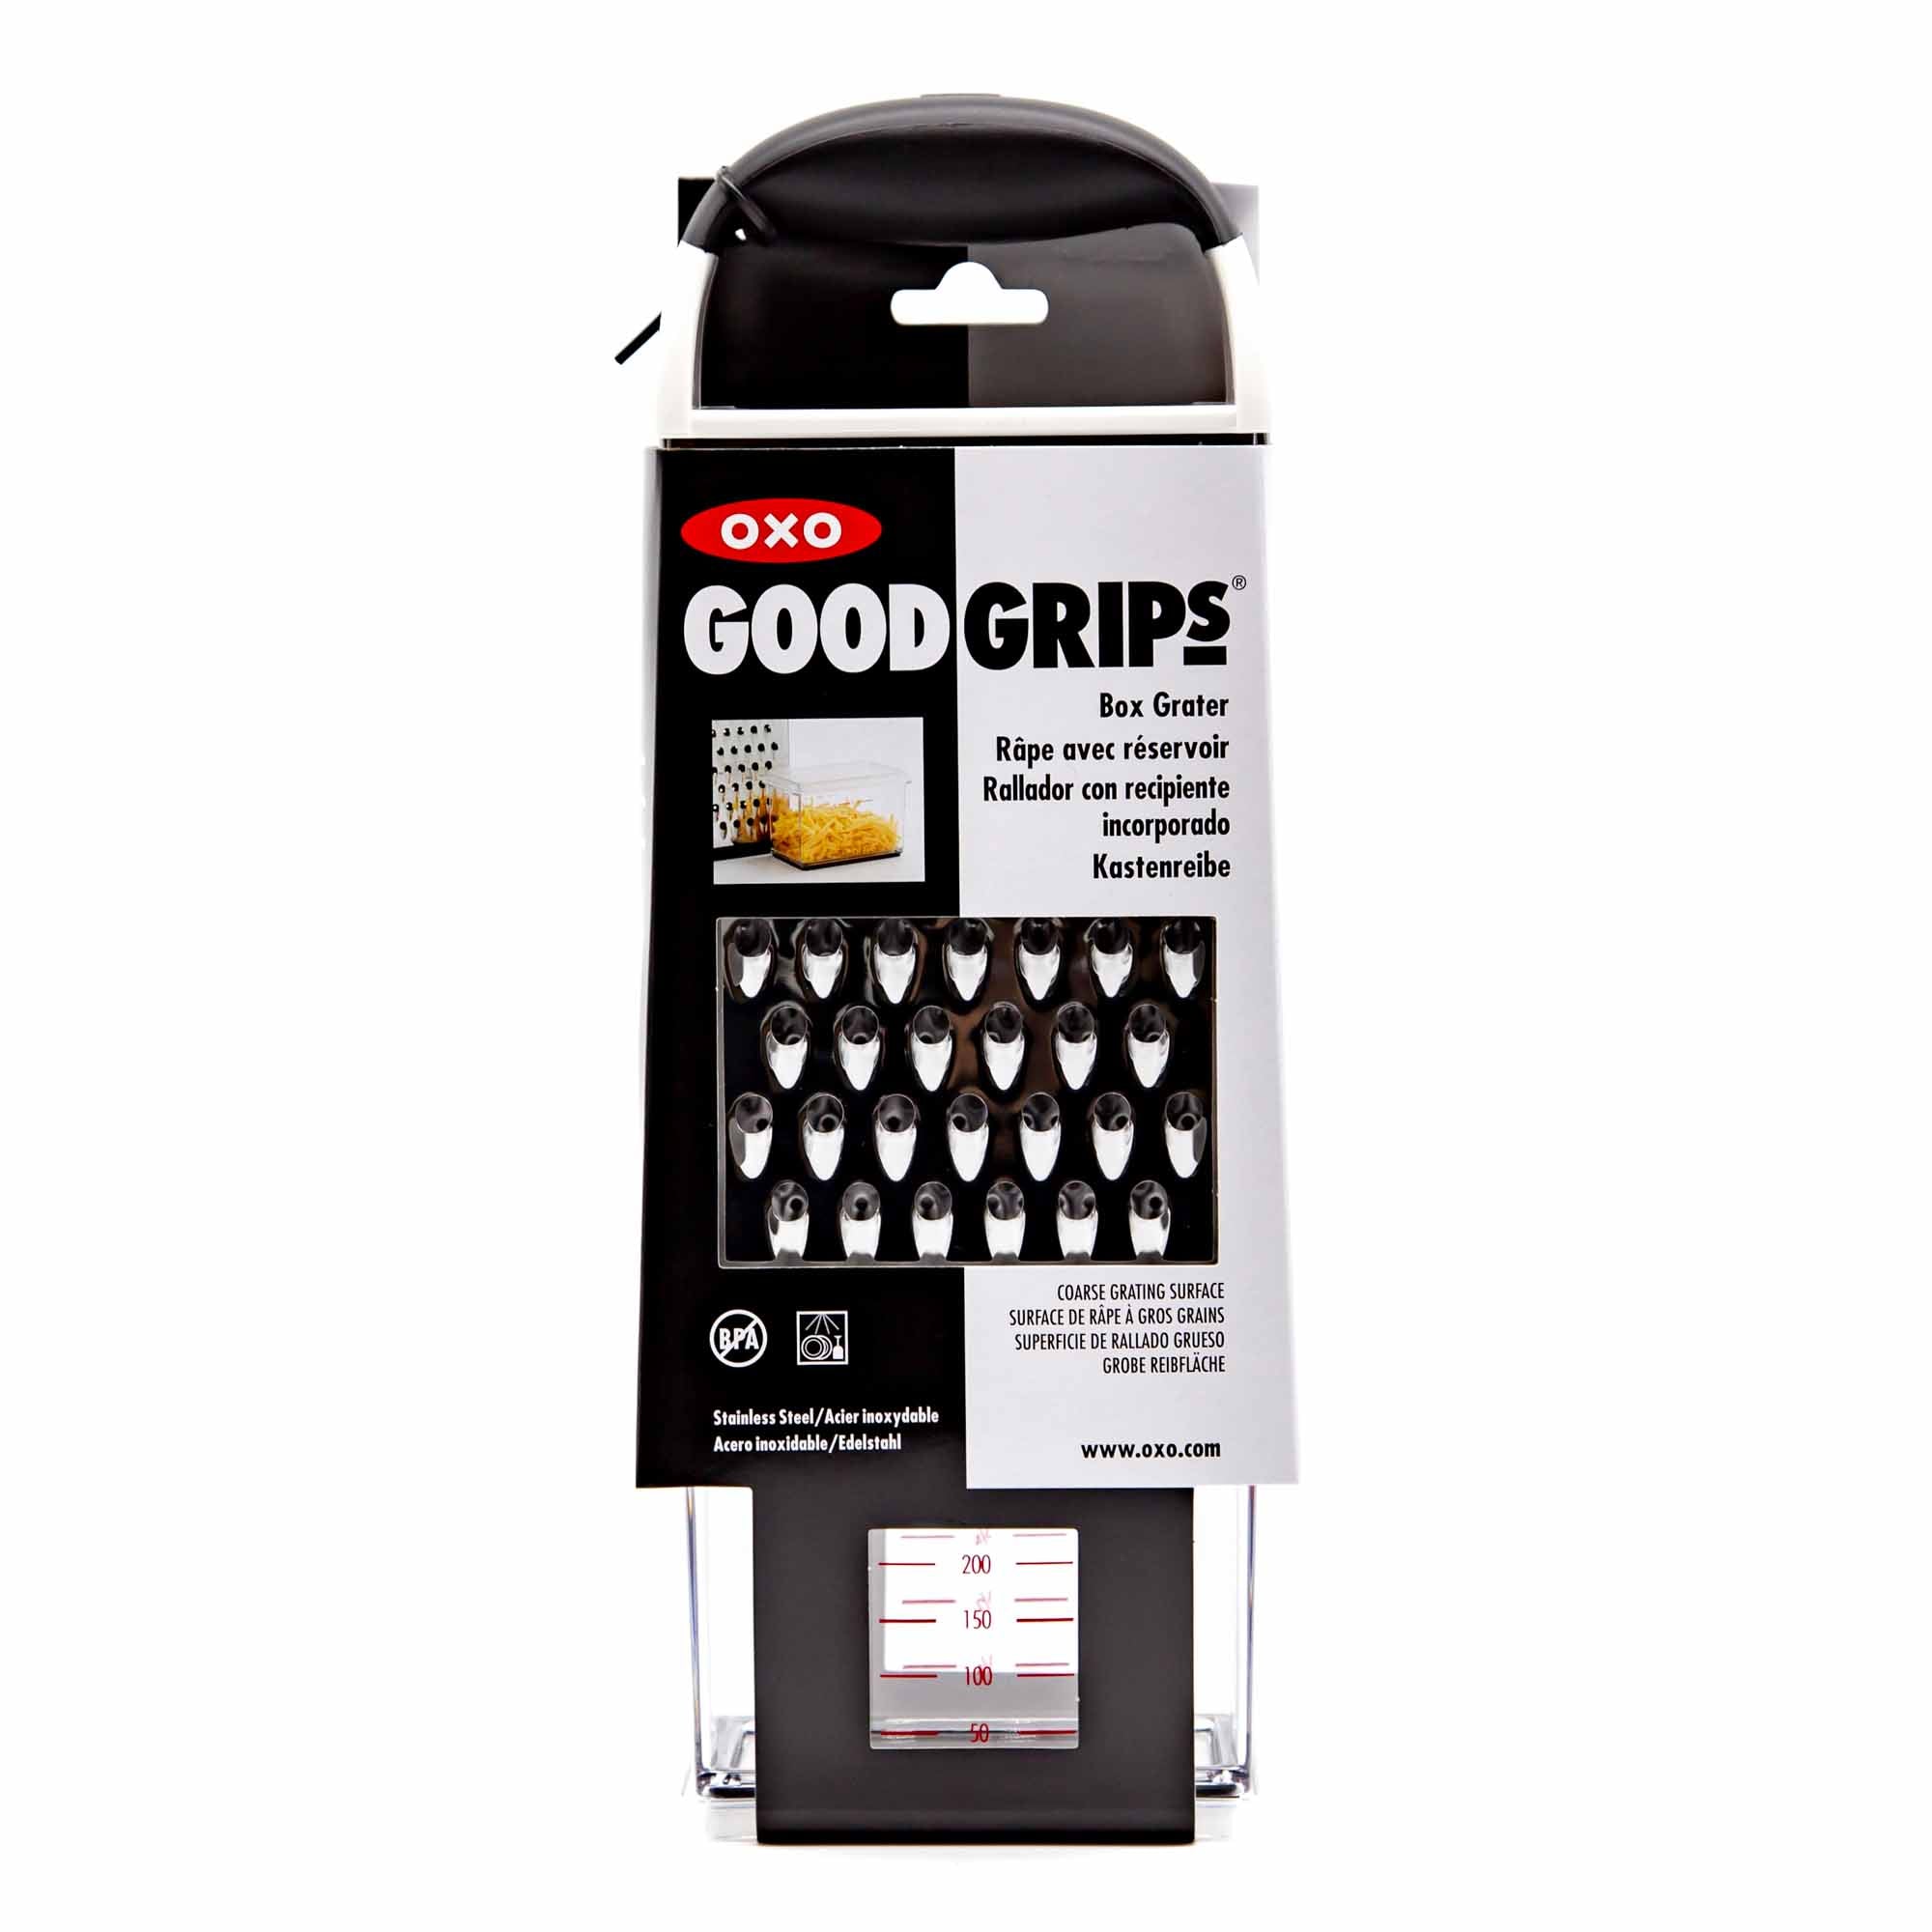 OXO Good Grips Box Grater - Mortise And Tenon